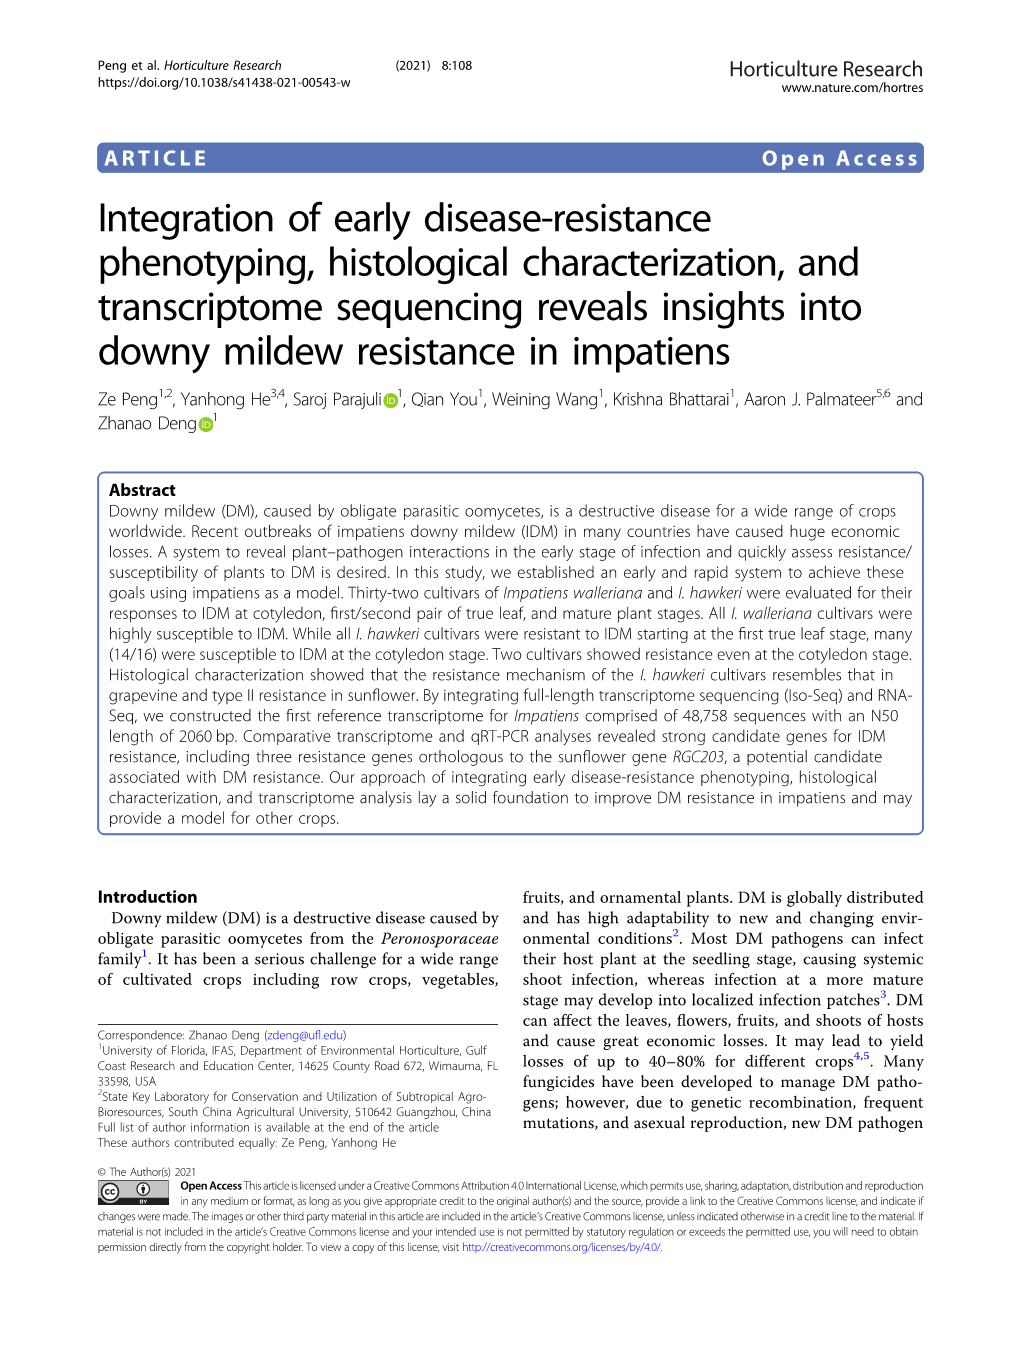 Integration of Early Disease-Resistance Phenotyping